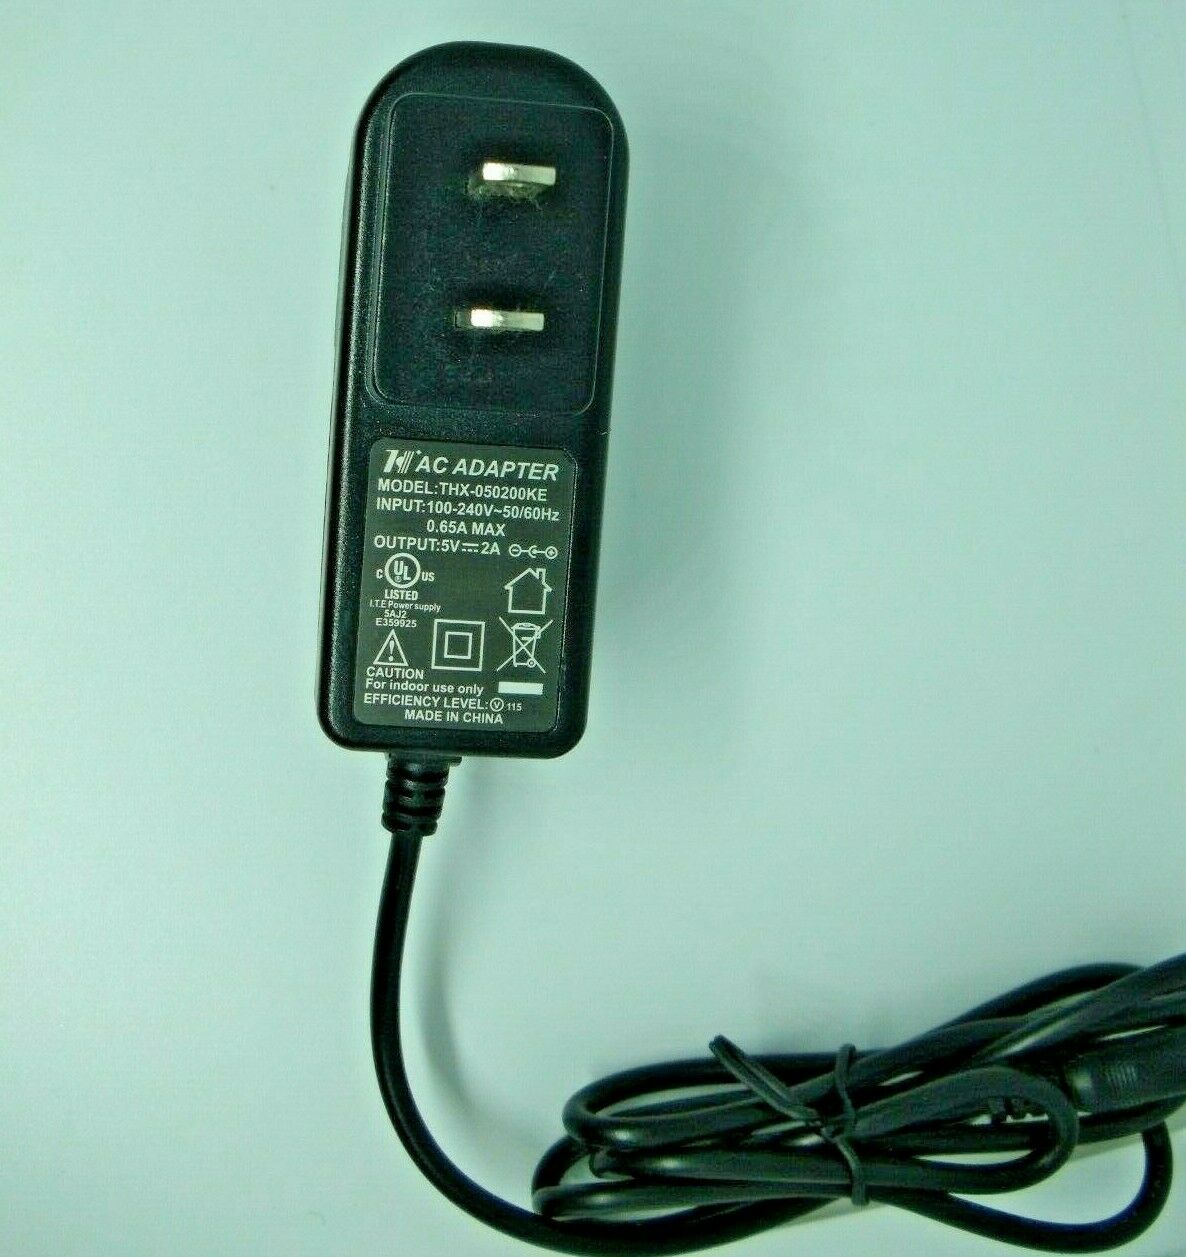 AC DC Power Supply Adapter THX-050200KE Output 5v 2A Thin Plug USA SELLER Type: Adapter Features: Powered Cable Leng